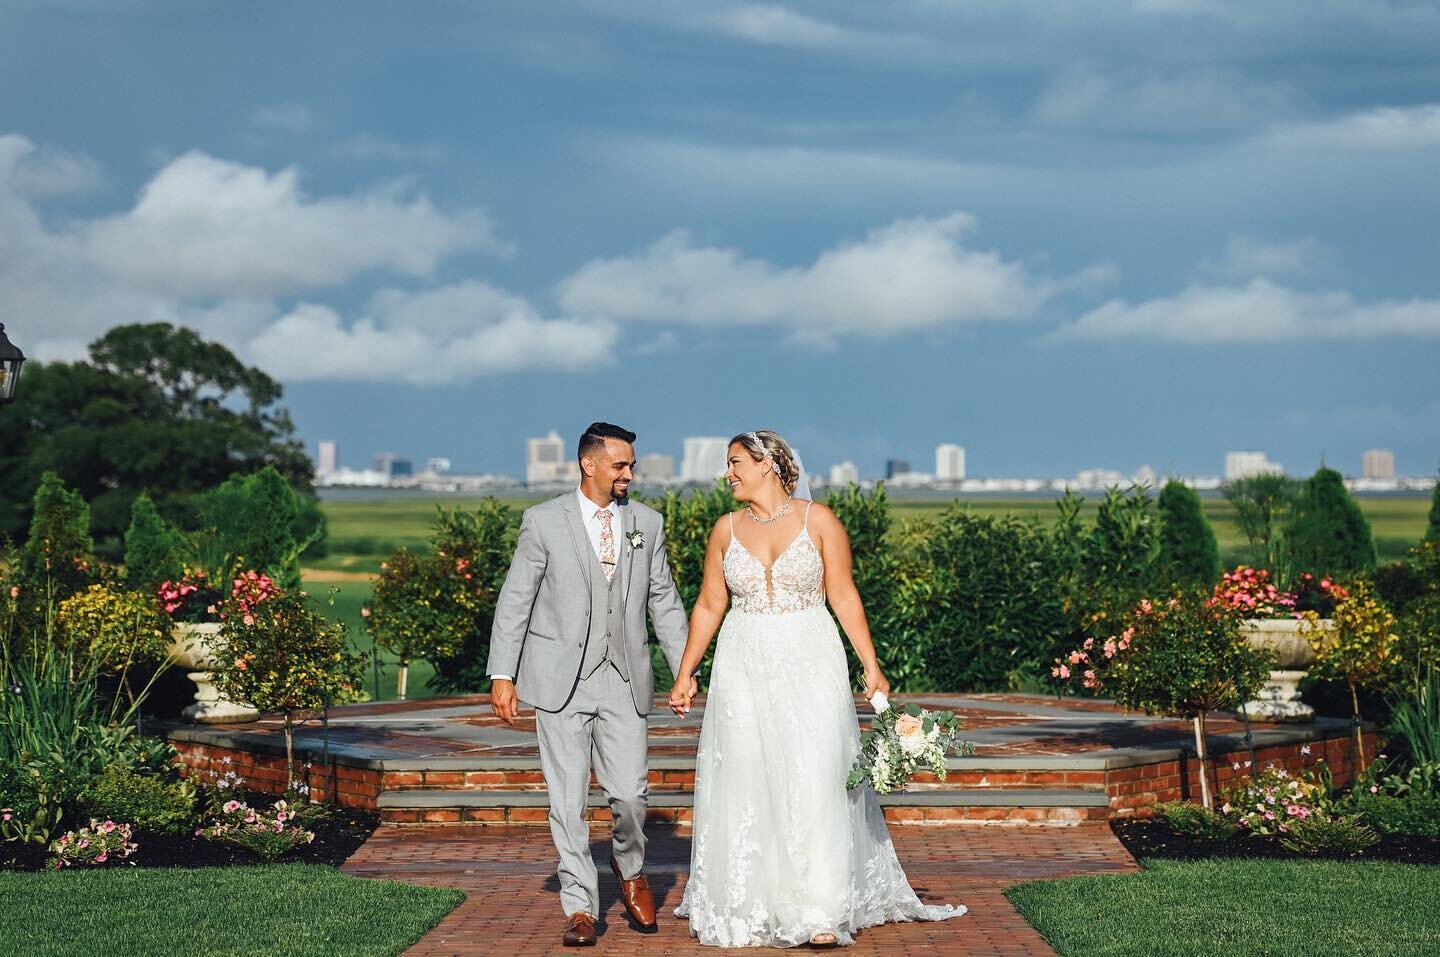 The beauty after the rain. Aly and Josh this day has been 2 years in the making. 3 date changes and look what we ended up with. The most perfect day. @rightupyour_aly @maxbridalny @atlanticcitycountryclub @centerstageent @bridalmakeupbykat @petalandp